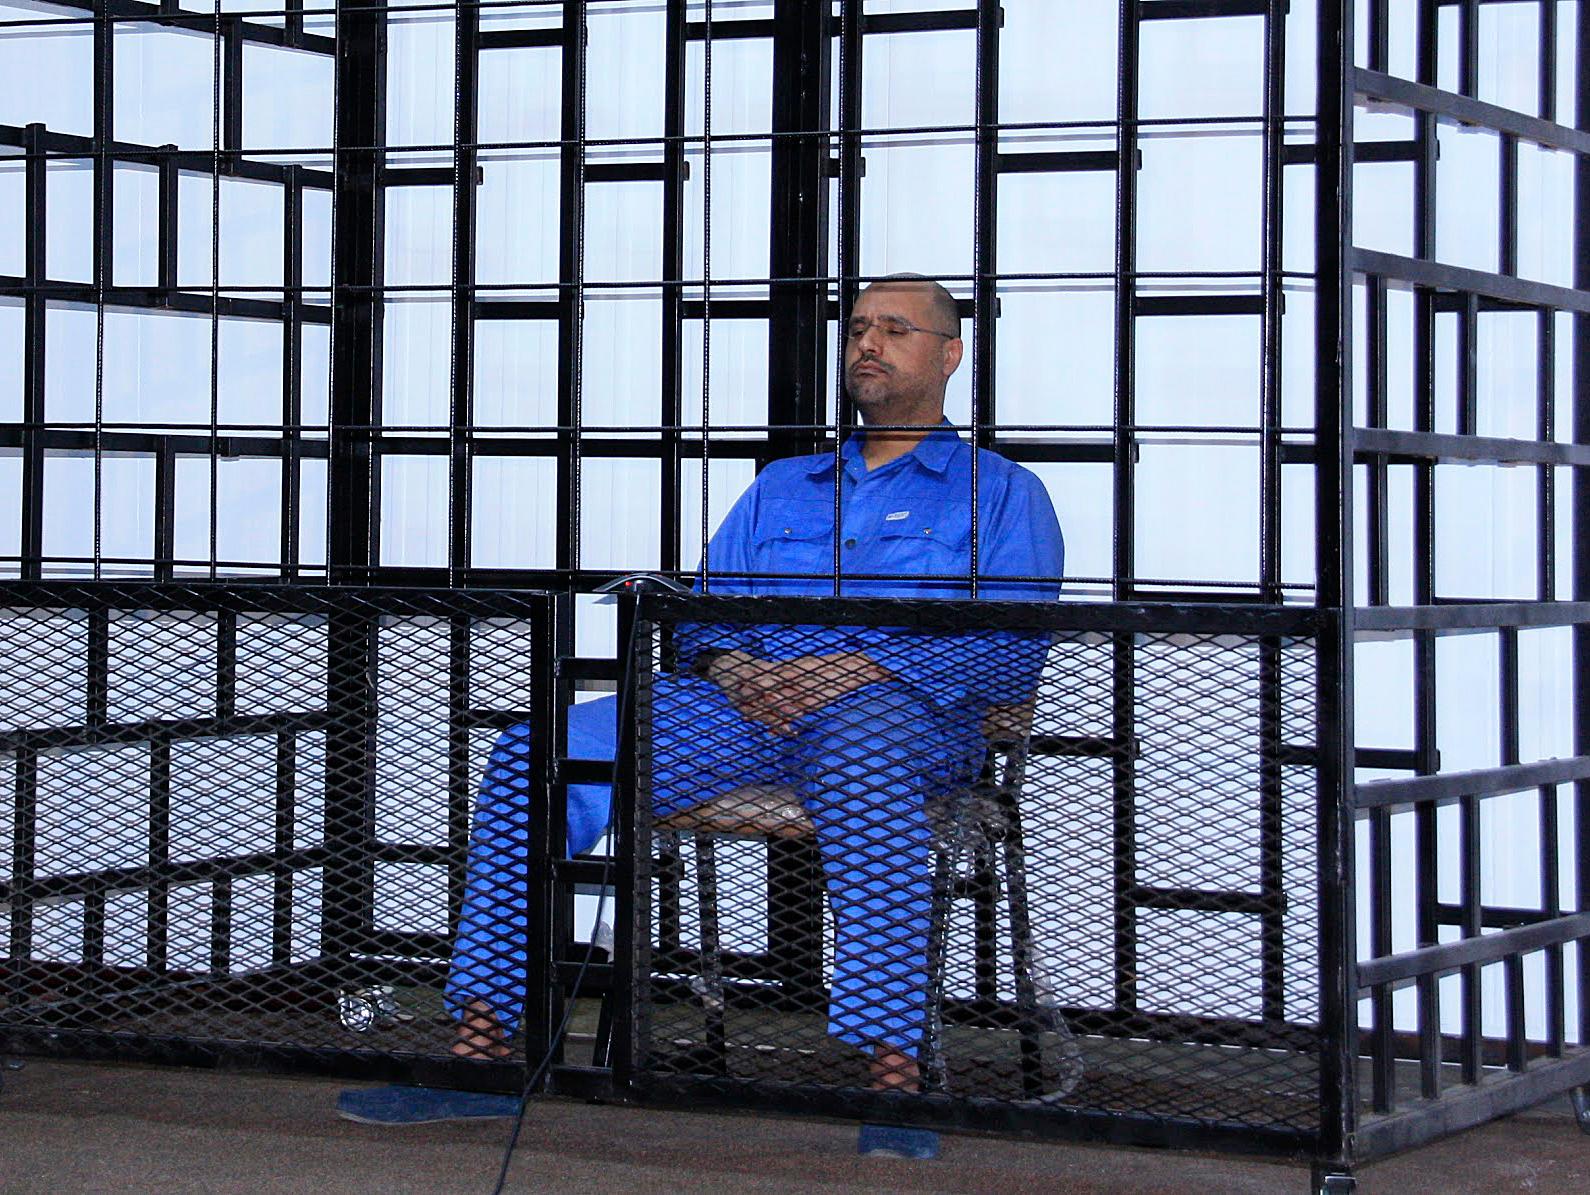 Saif al-Islam Gaddafi attending a hearing at the beginning of his trial in 2014. Here he’s seen in a courtroom in Zintan, linked via video to the actual trial in the capital, Tripoli.